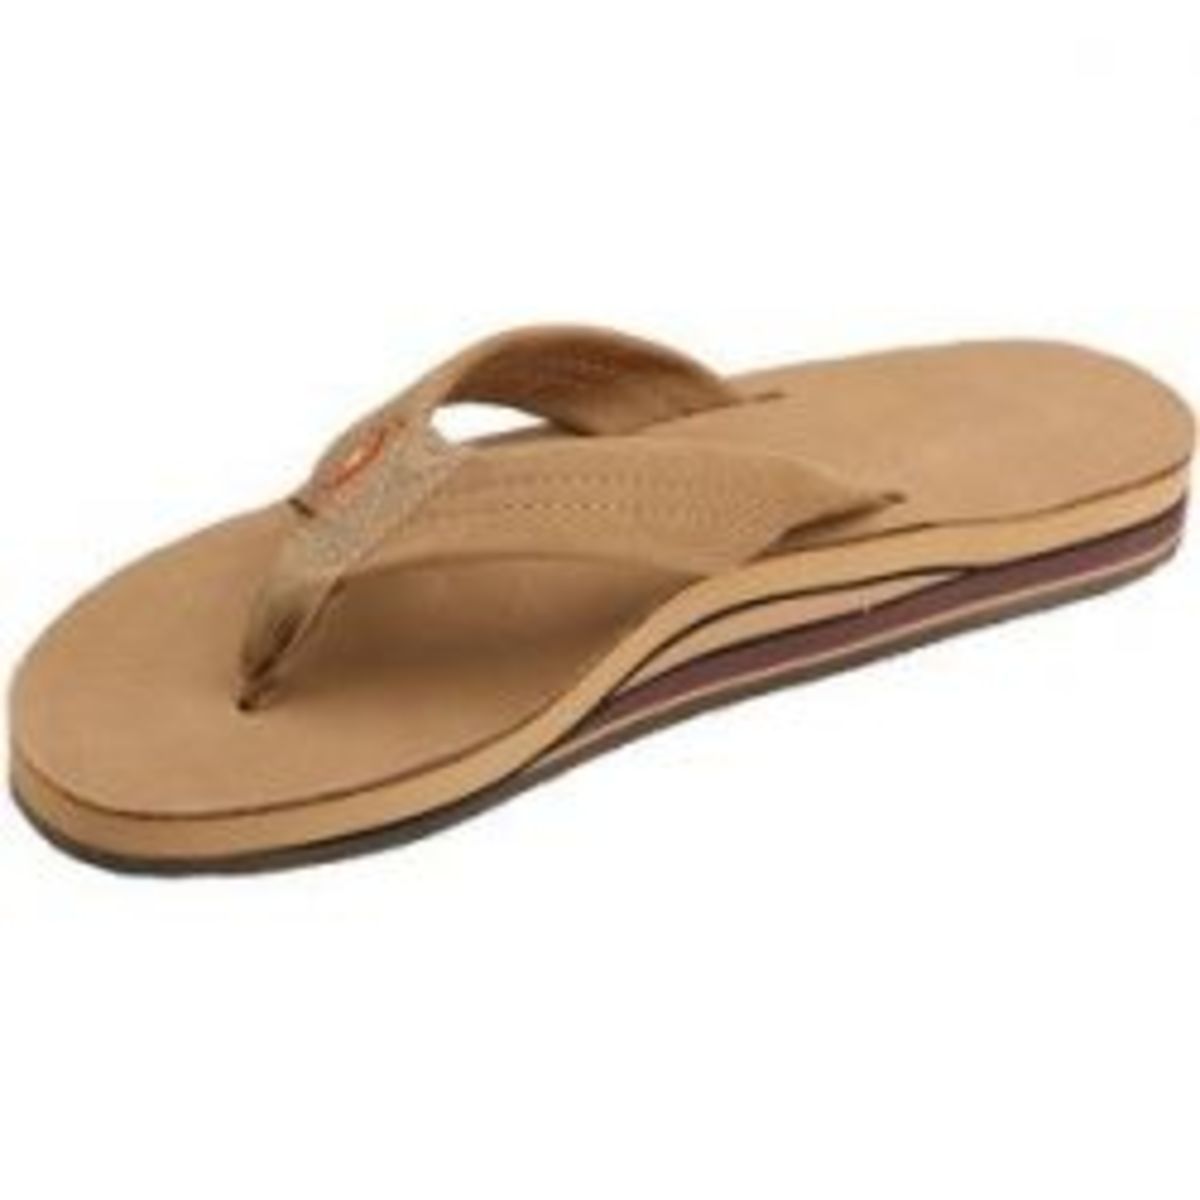 Rainbow Women's Premier Double Layer Wide Strap Sandals are the style that my podiatrist recommends I wear.  While I would not go hiking in them, they are perfect for the beach or pool.